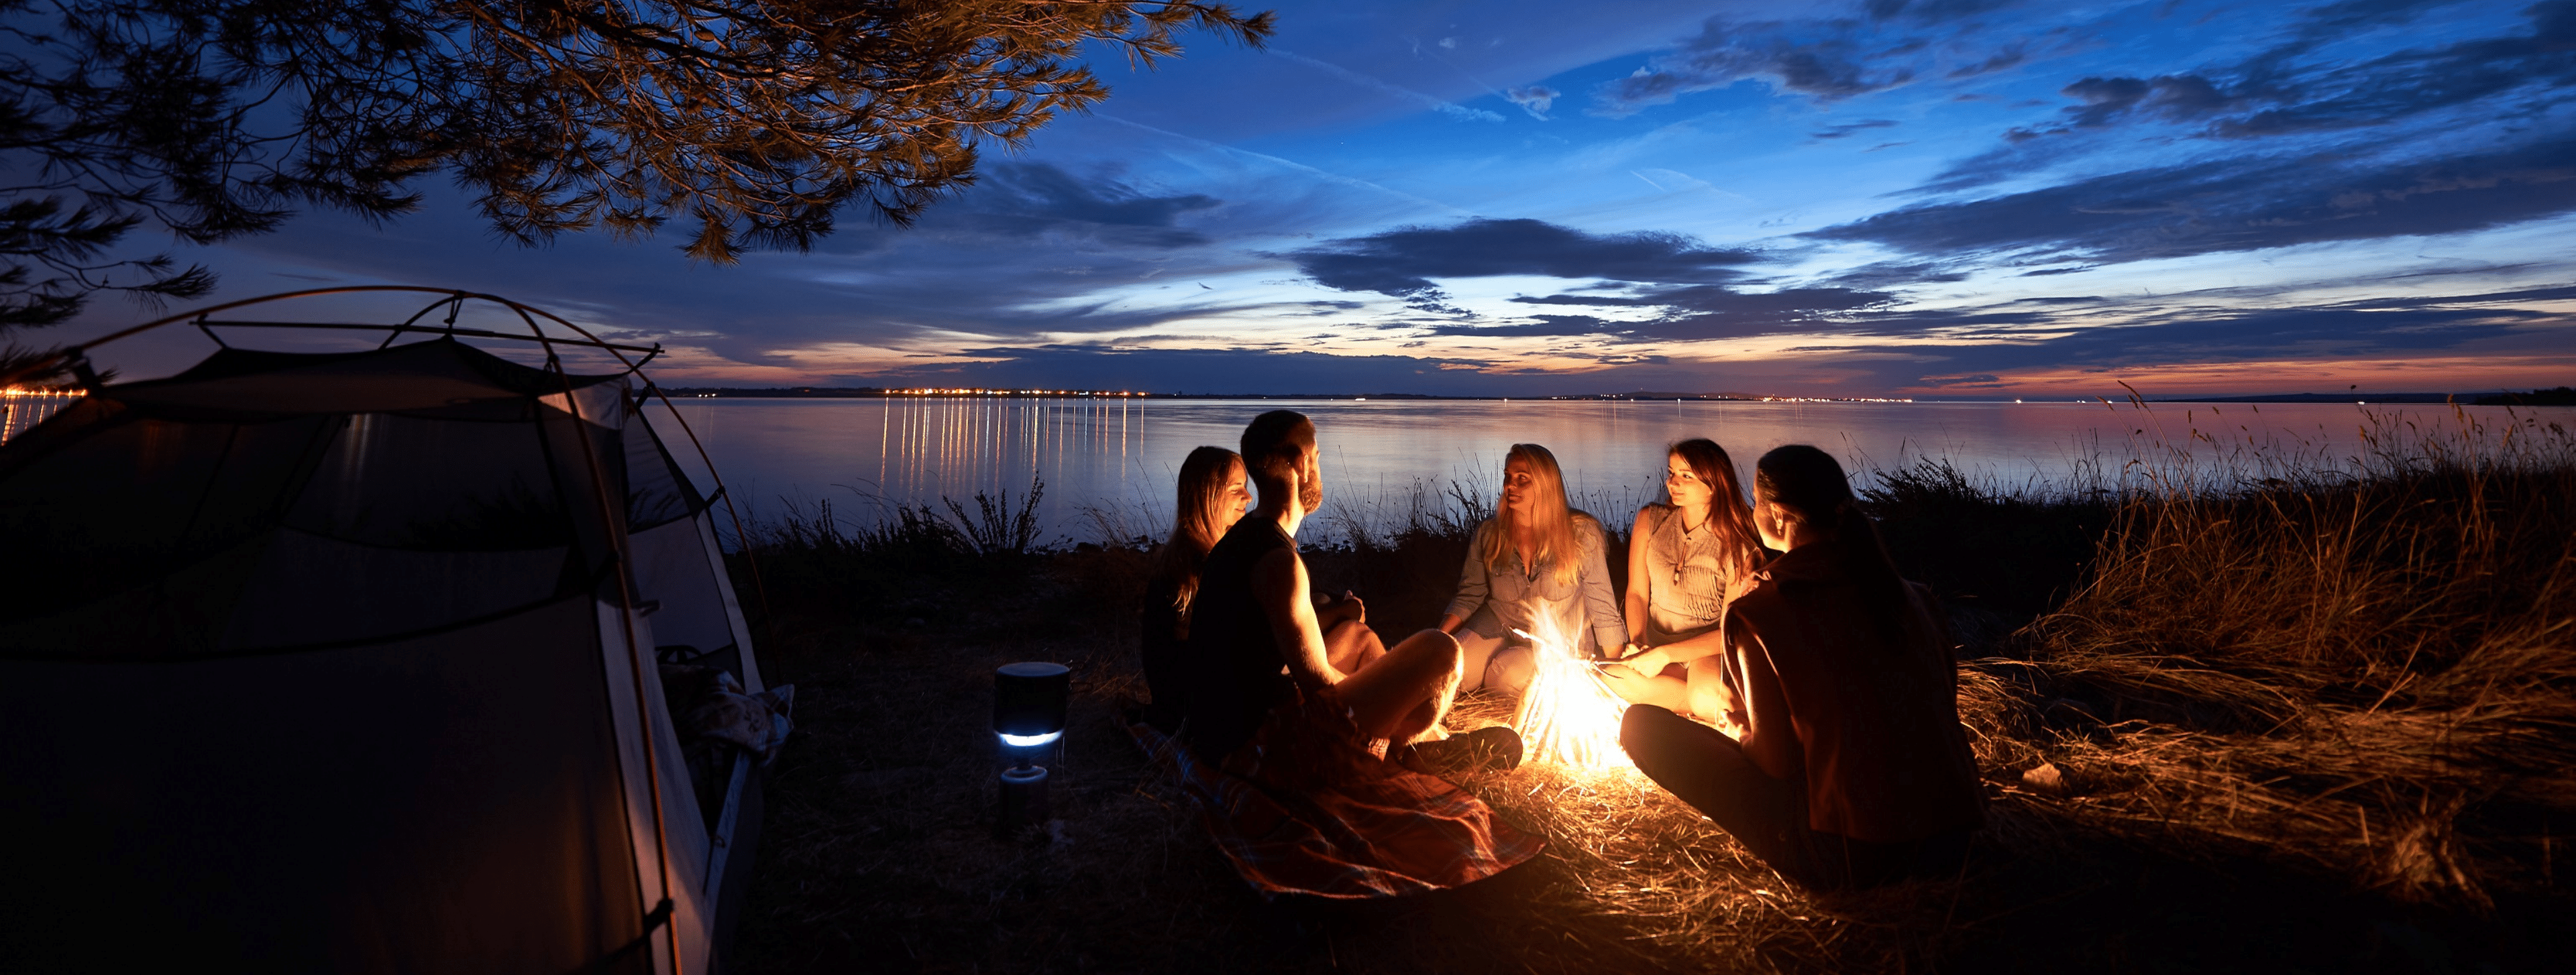 Why gathering around a campfire sparks human connection